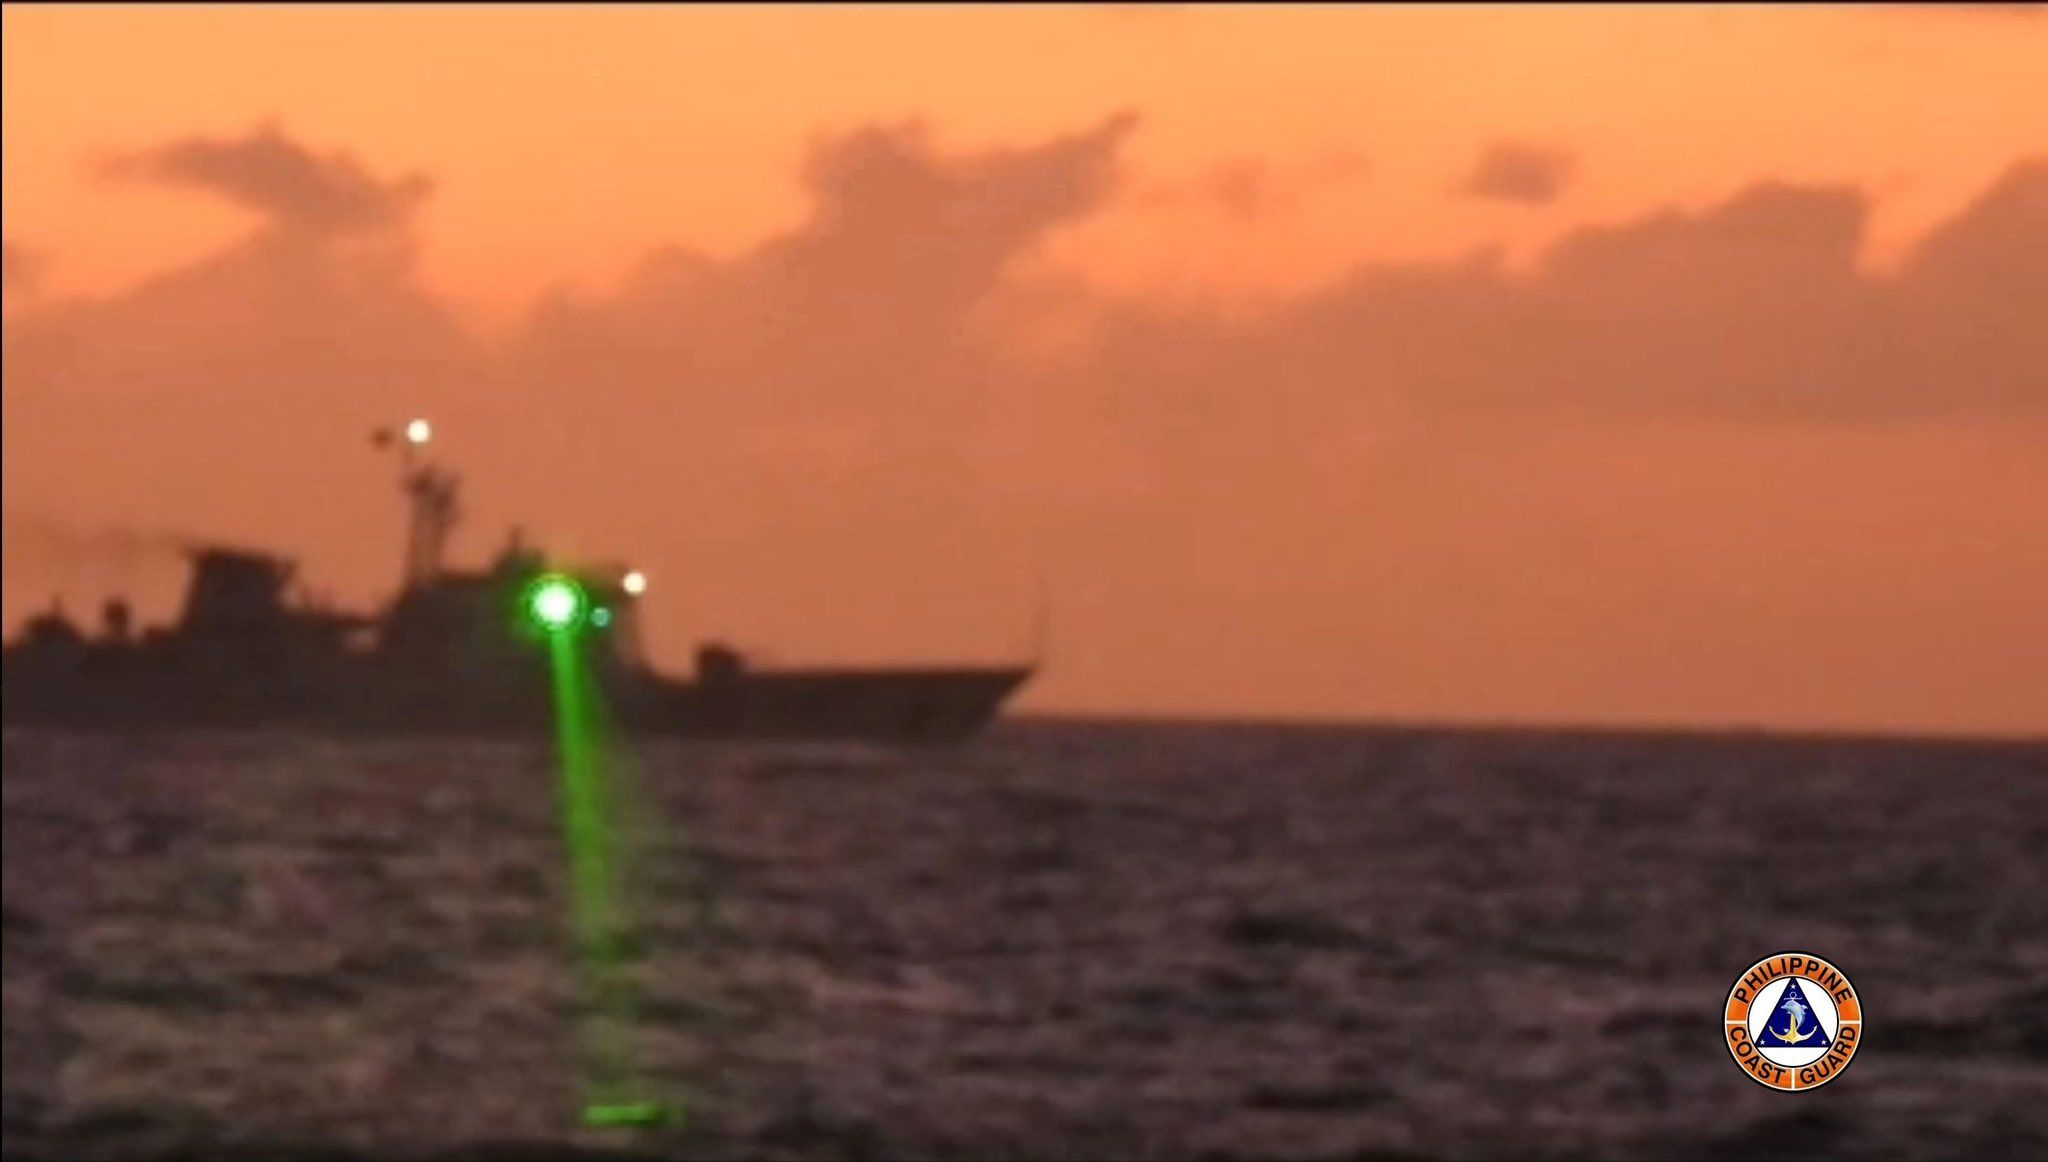 Chinese ship uses military-grade laser to attack Philippine ship, ‘temporarily blinding’ crew